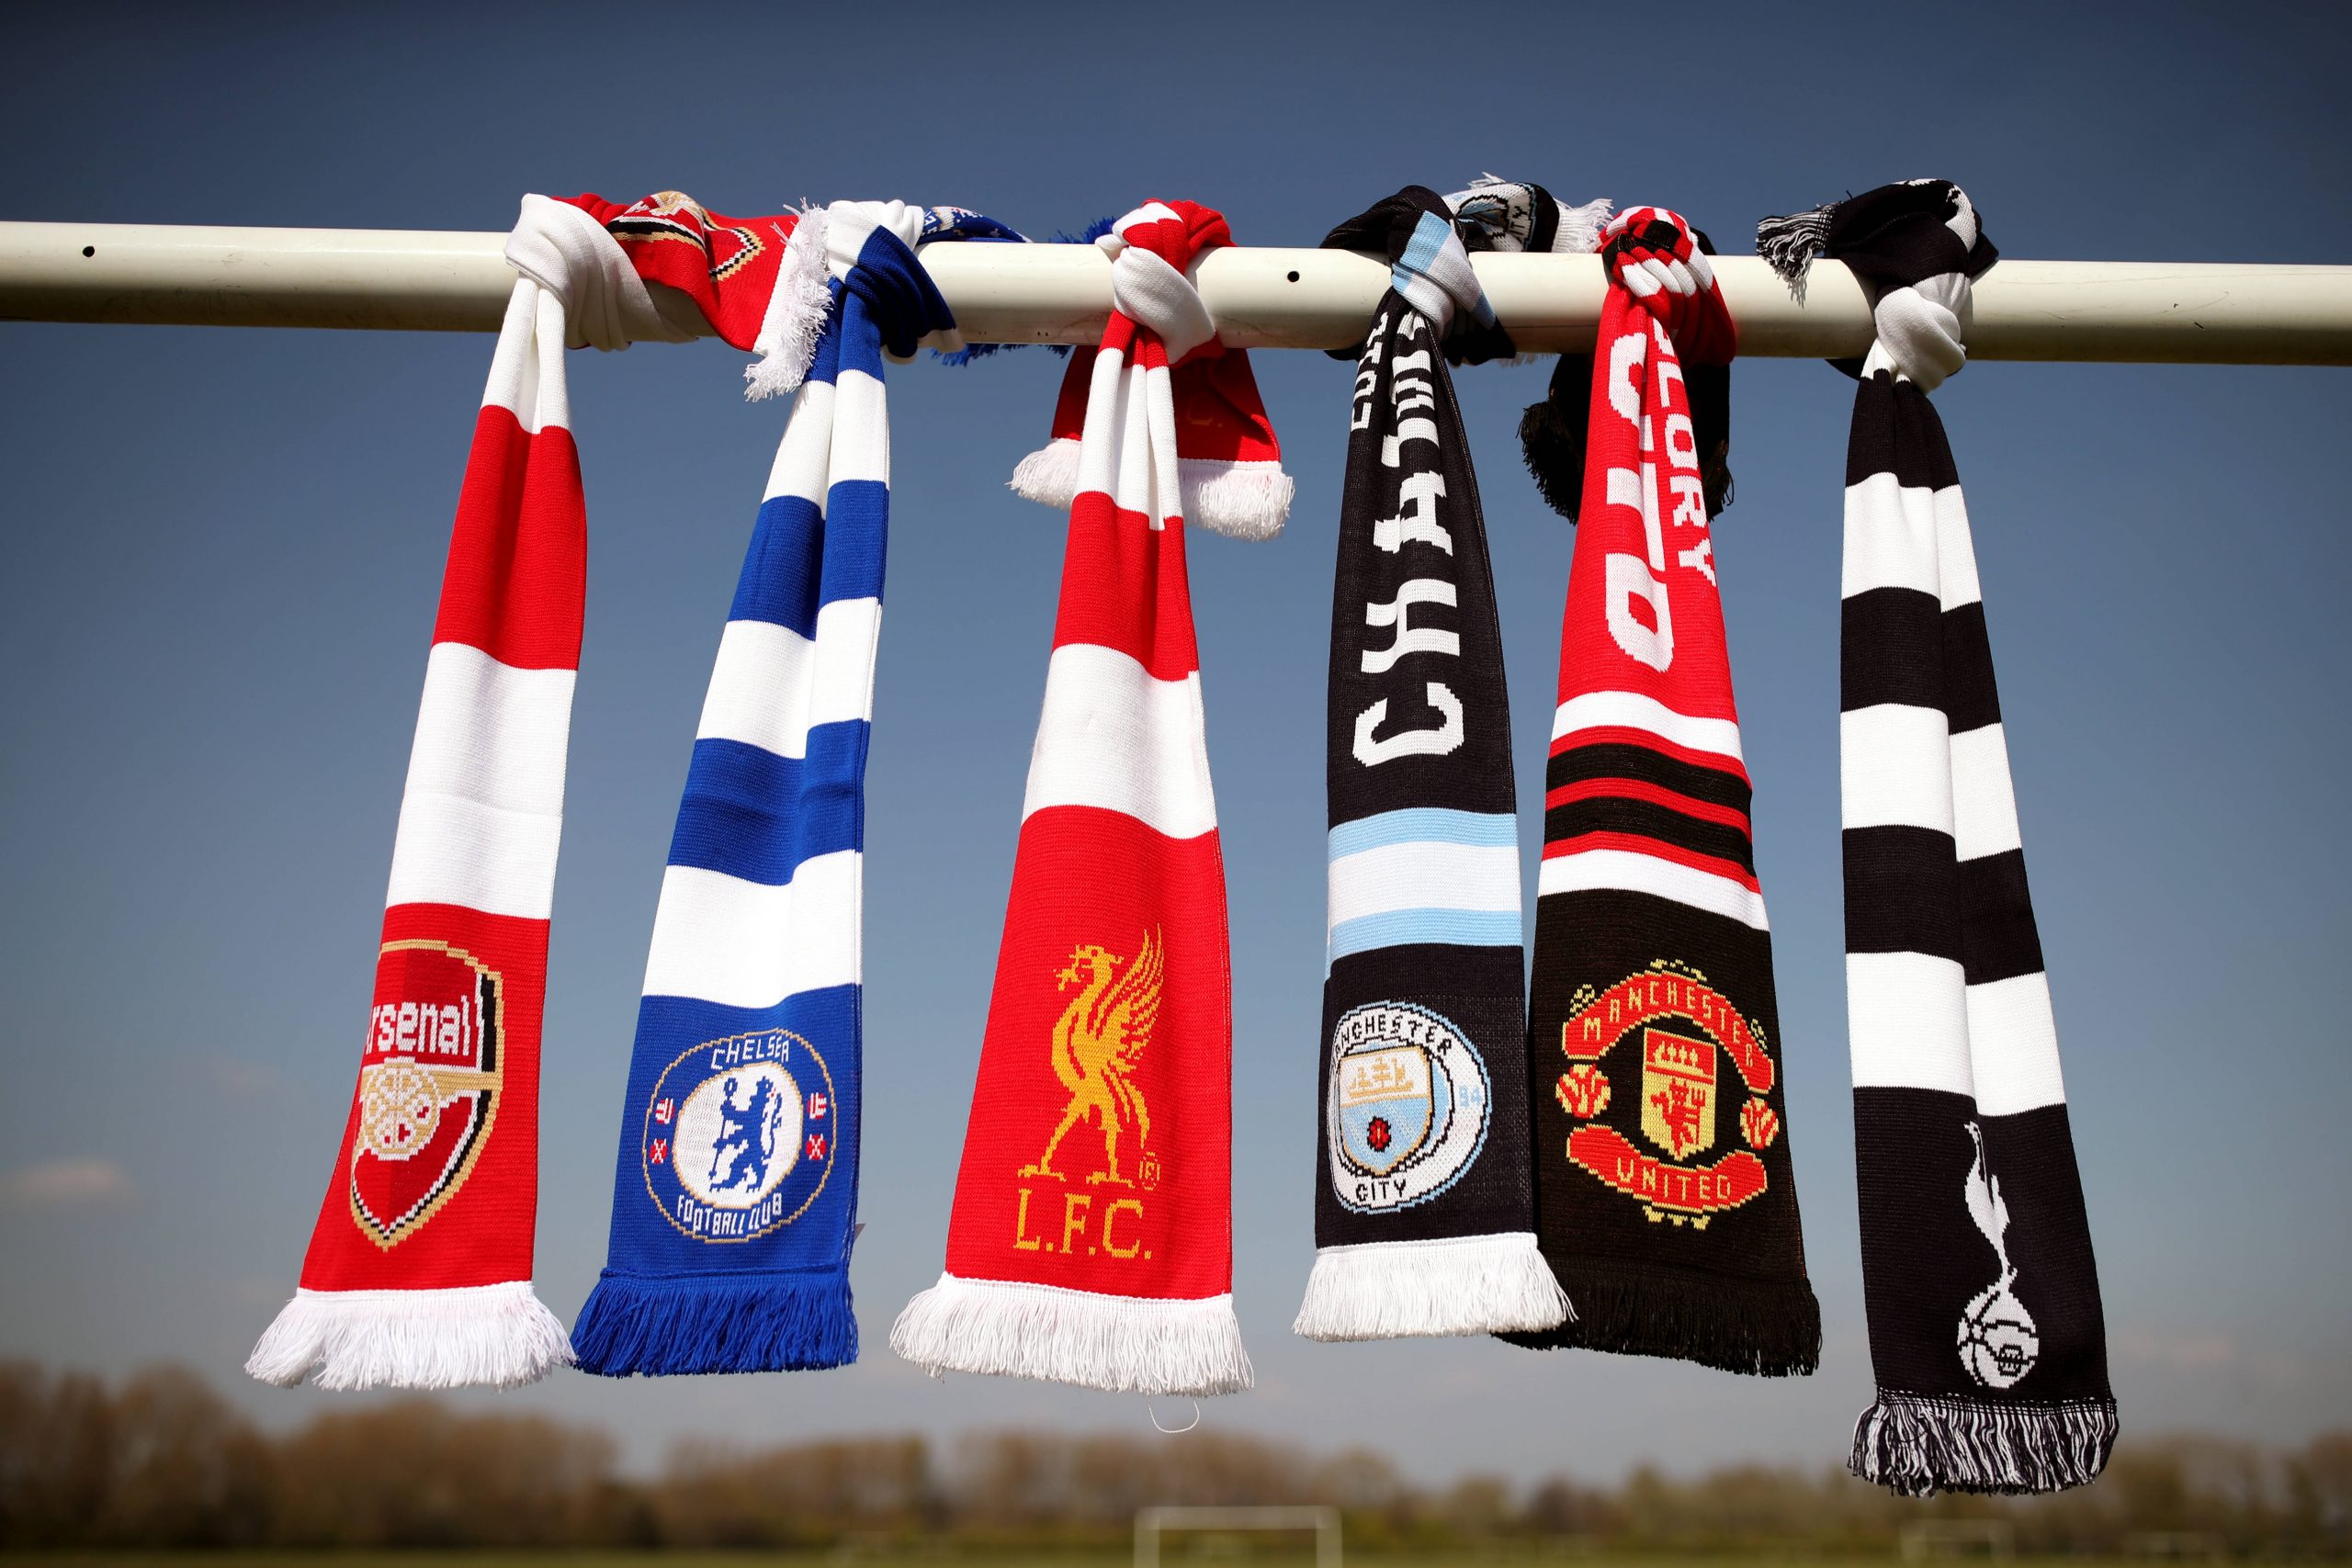 New US TV rights deal for the Premier League could give all clubs including Tottenham Hotspur a big windfall..